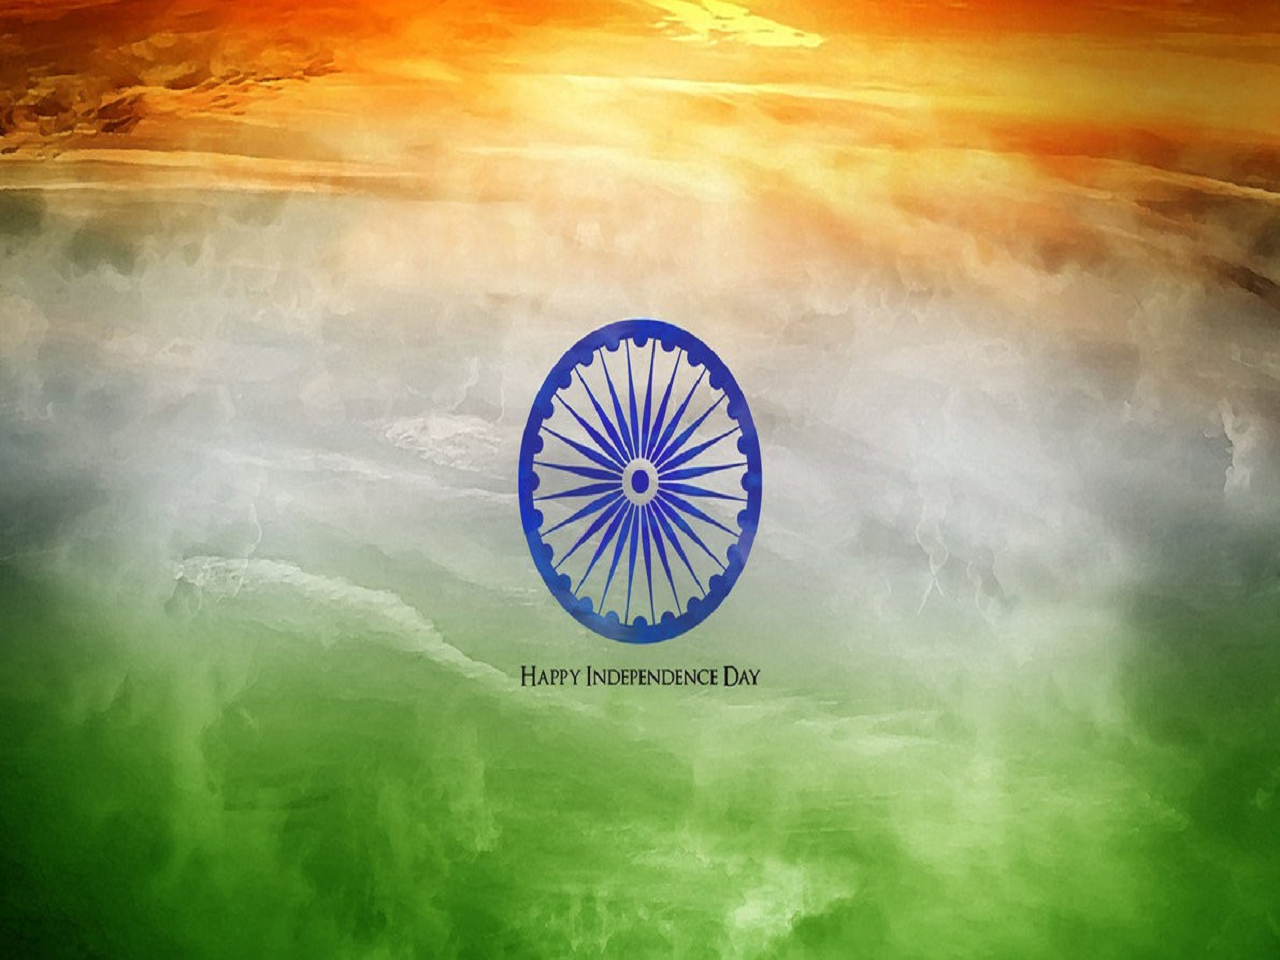 Independence Day Wallpapers Free Download for Facebook Desktop | Happy Independence  Day Pictures, Pics to Share on FB